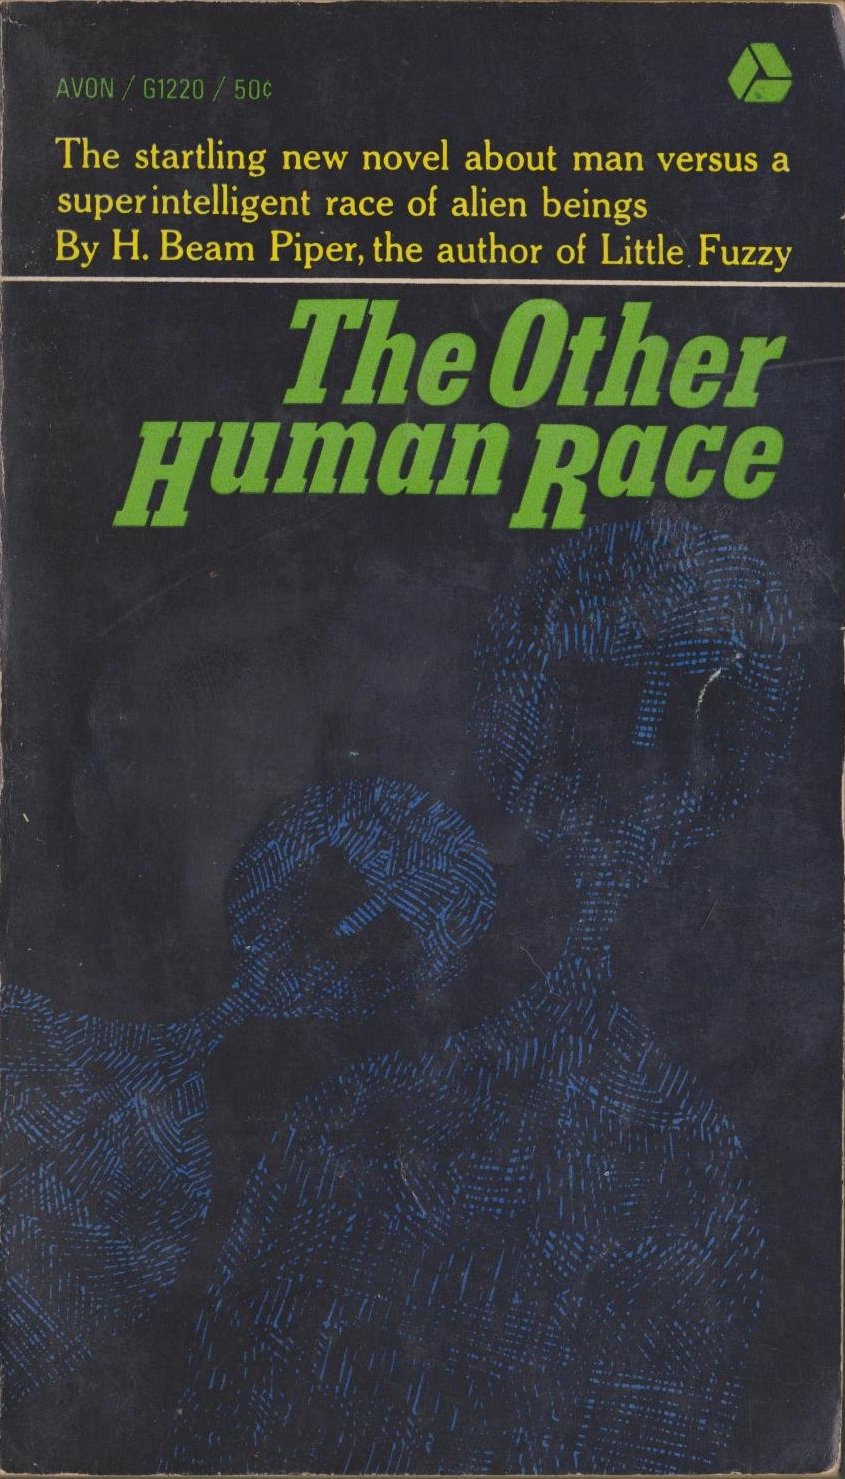 Image - cover of The Other Human Race by H. Beam Piper, Avon 1964